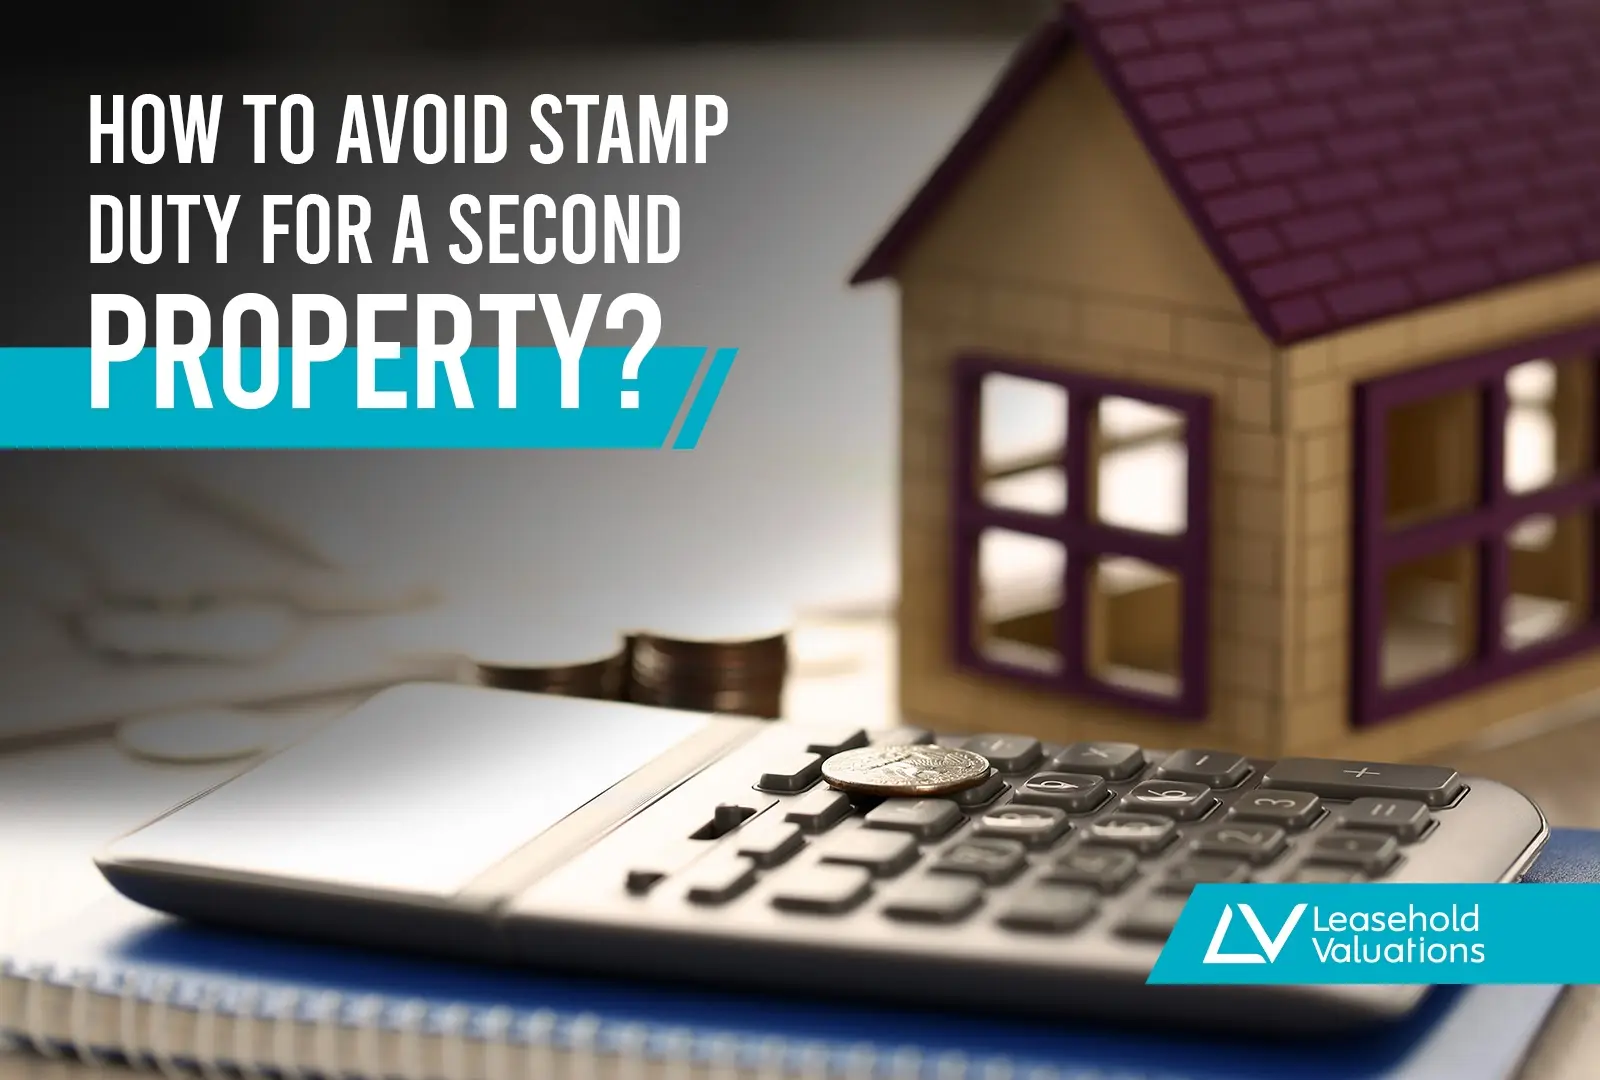 How to avoid stamp duty for second property